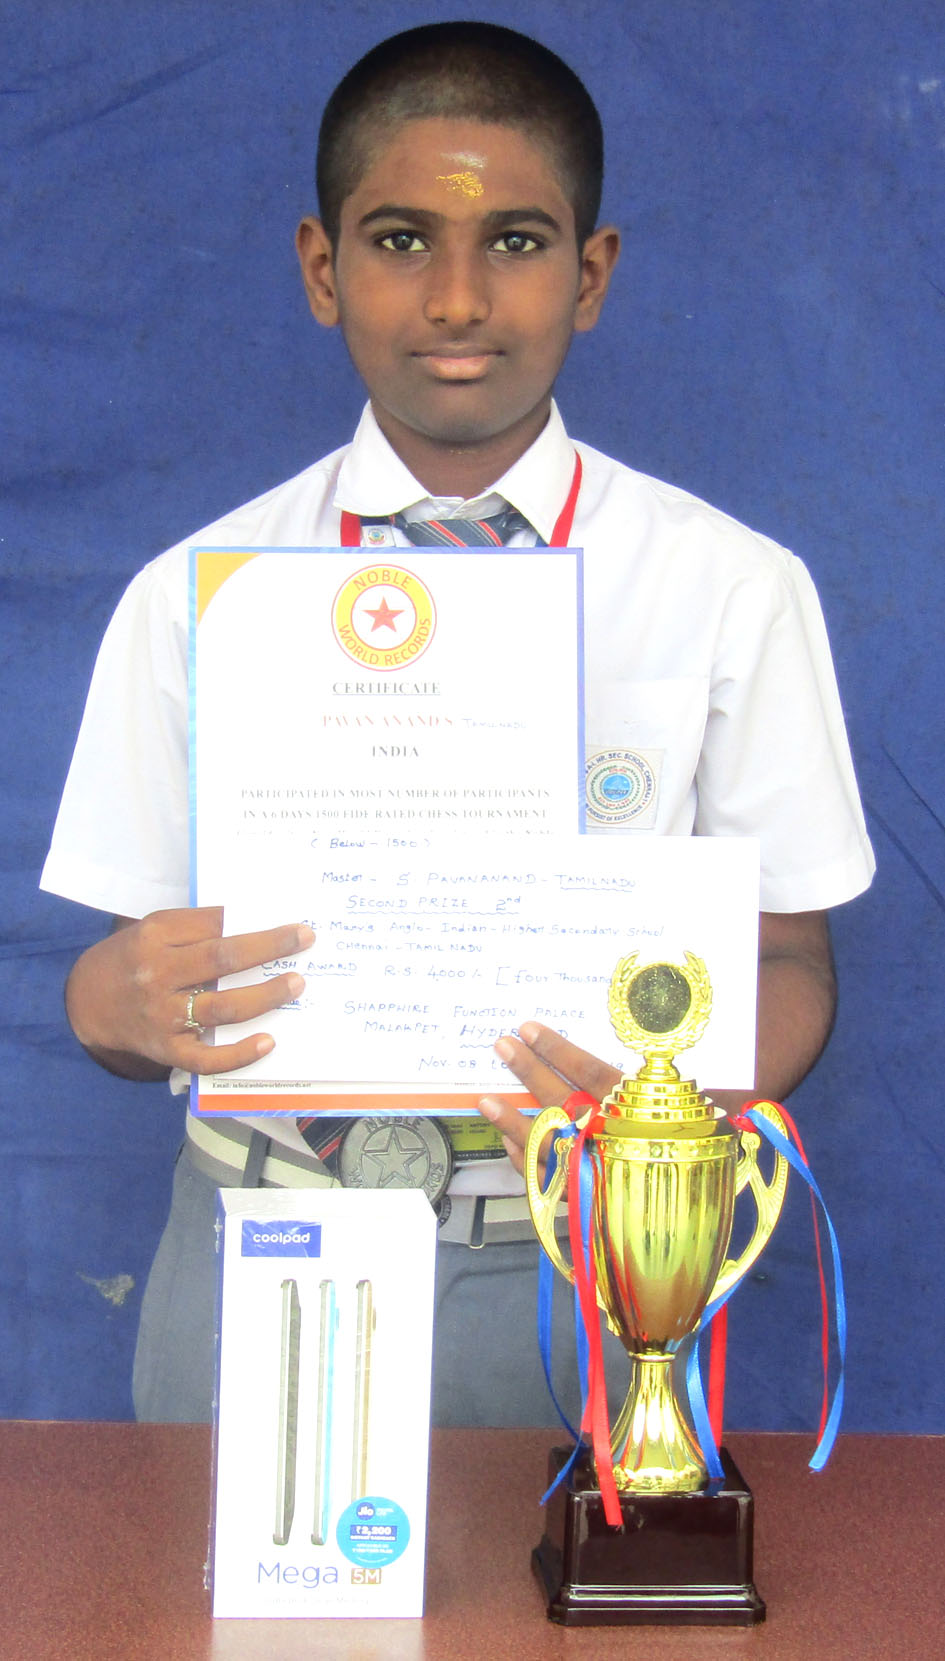 MASTER PAVAN ANAND S of 8A Ist place in the Chess competition organised by Kilpauk Chess center &  IInd place in the FIDE rated Chess Tournament organised by Valliammai Trust.